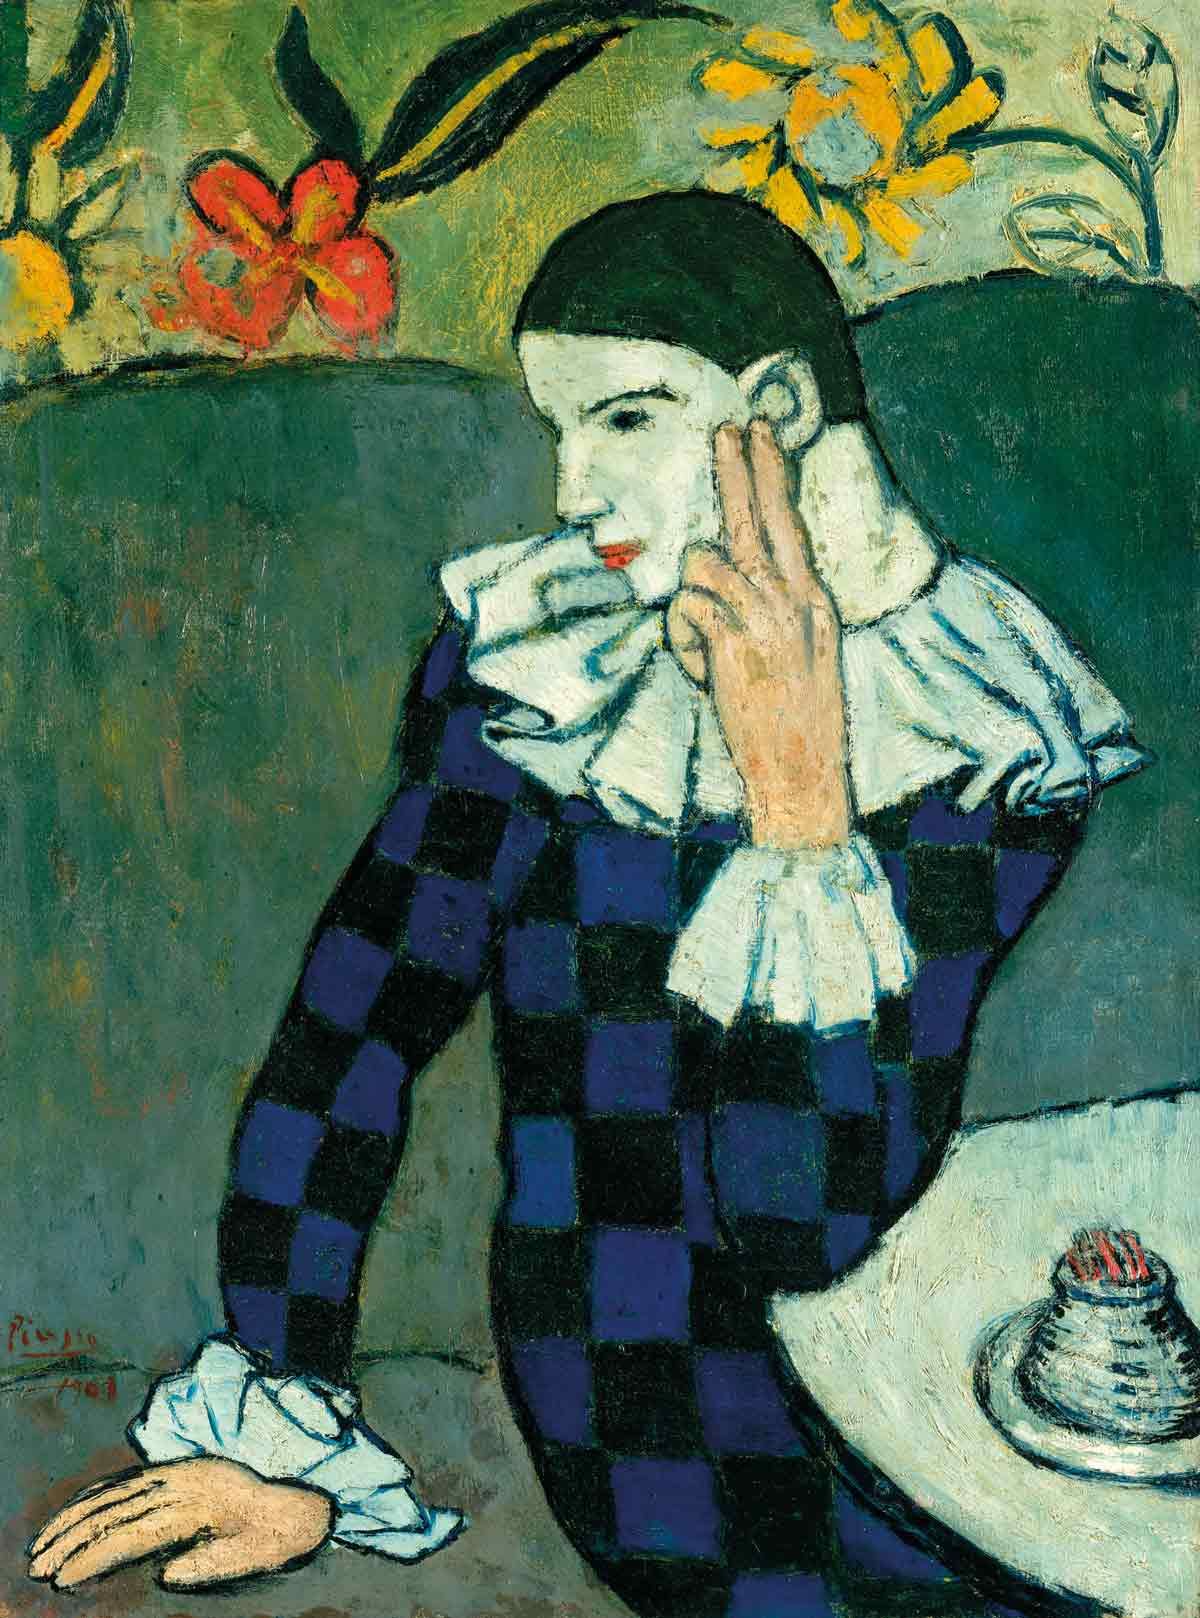 Picasso’s Arlequin Accoudé (1901) will be in the Beyeler’s blockbuster show next year Succession Picasso / ProLitteris, Zürich 2018. Photo ©The Metropolitan Museum of Art/Art Resource/Scala, Florence